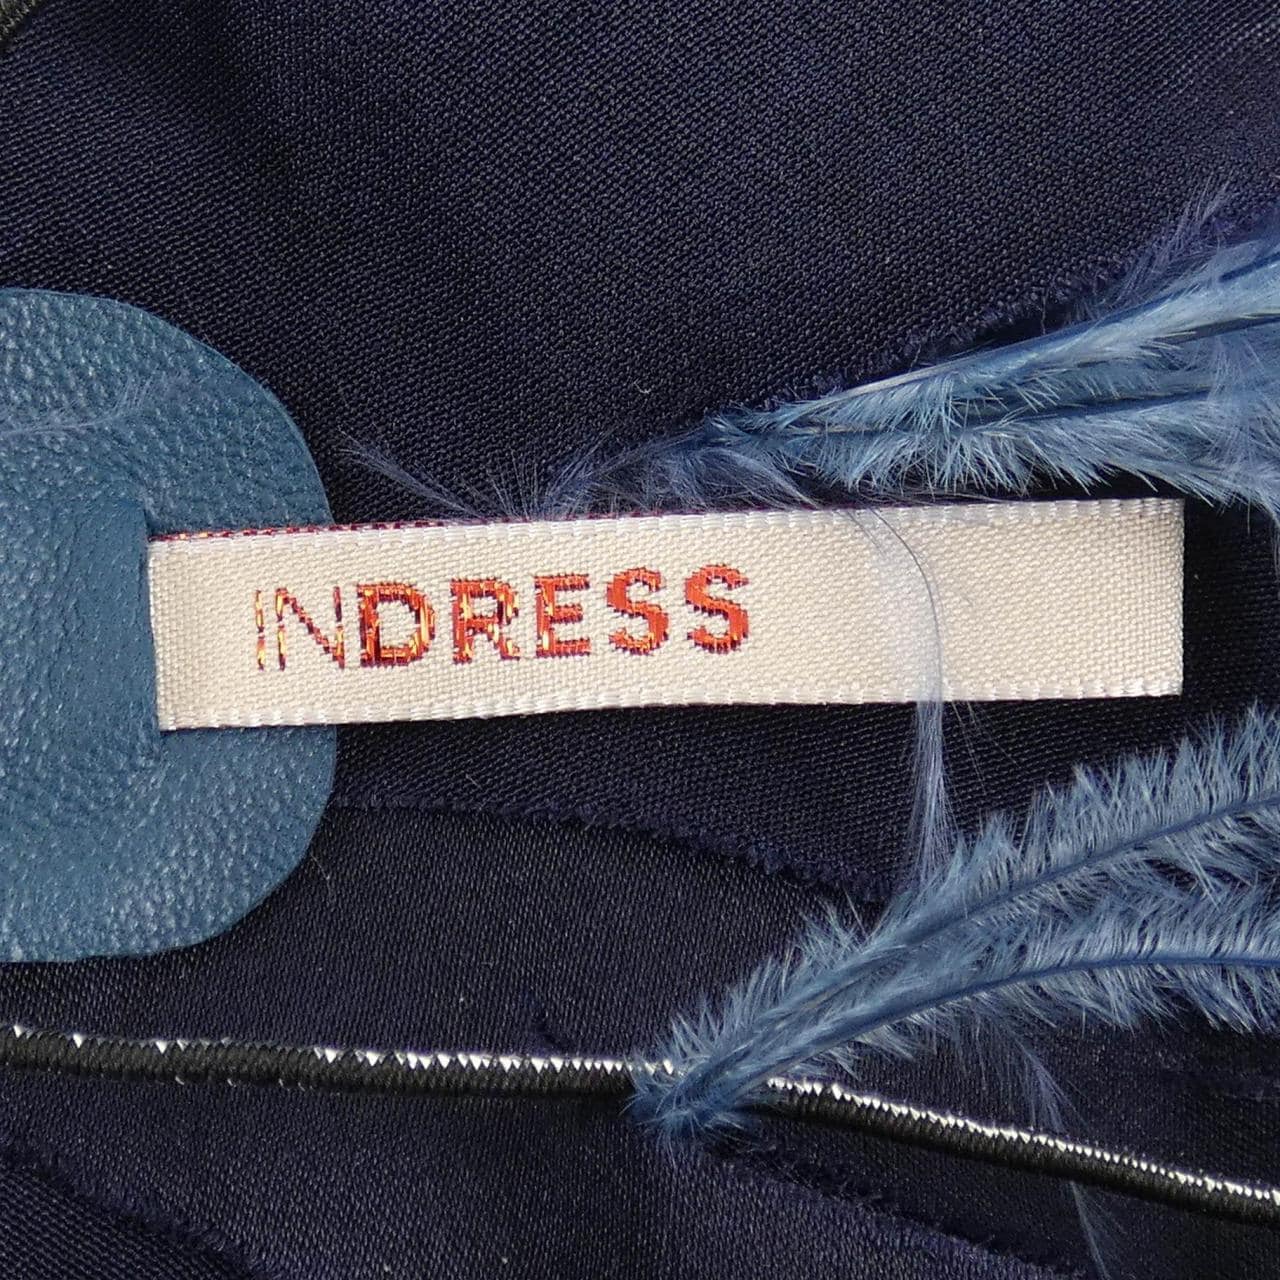 INDRESS ブローチ